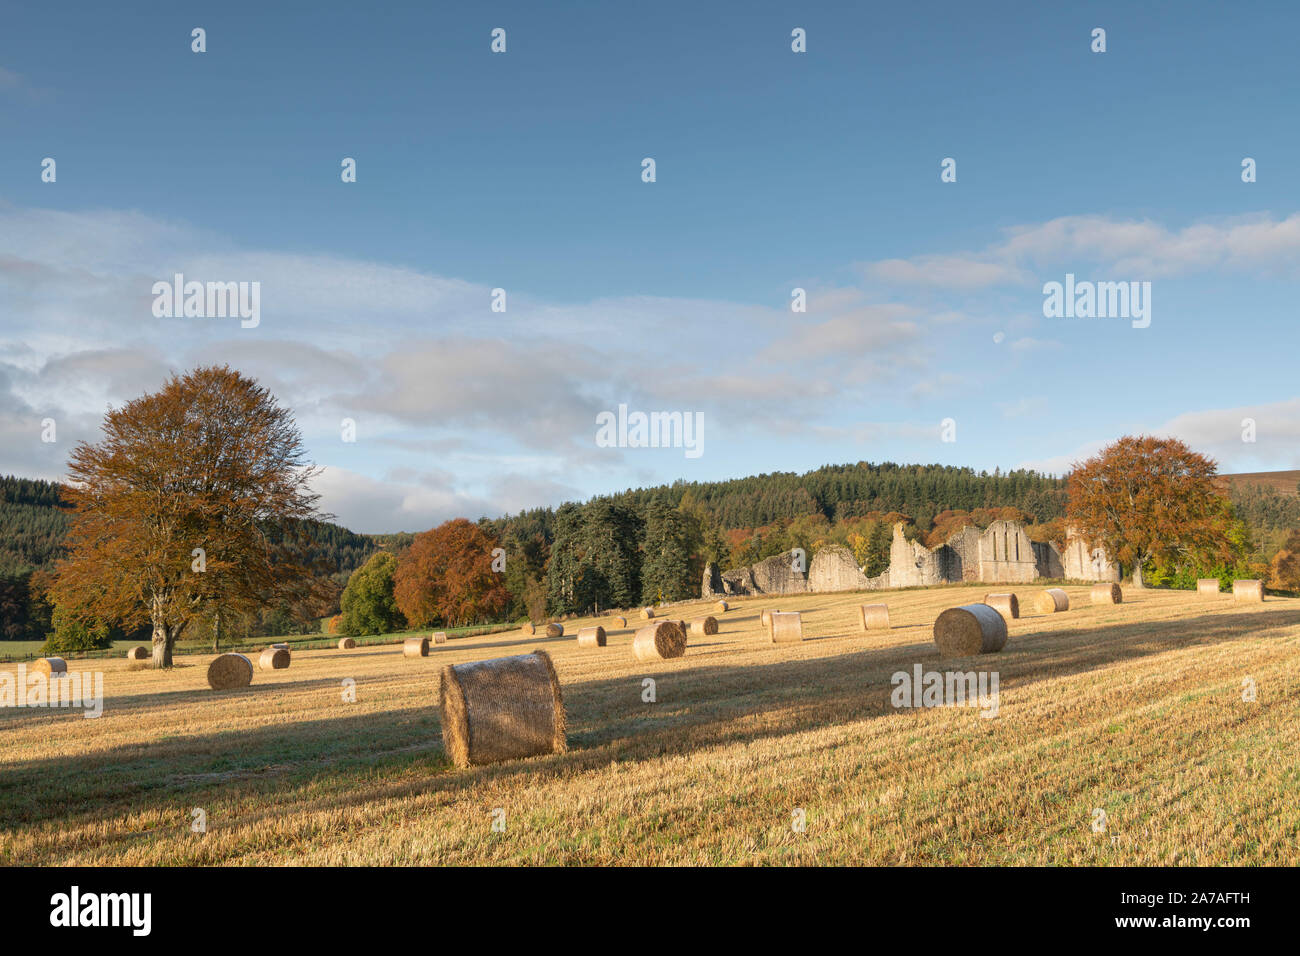 Beech Trees and Bales of Straw Colour This Autumn Scene at Kildrummy Castle in Scotland Stock Photo